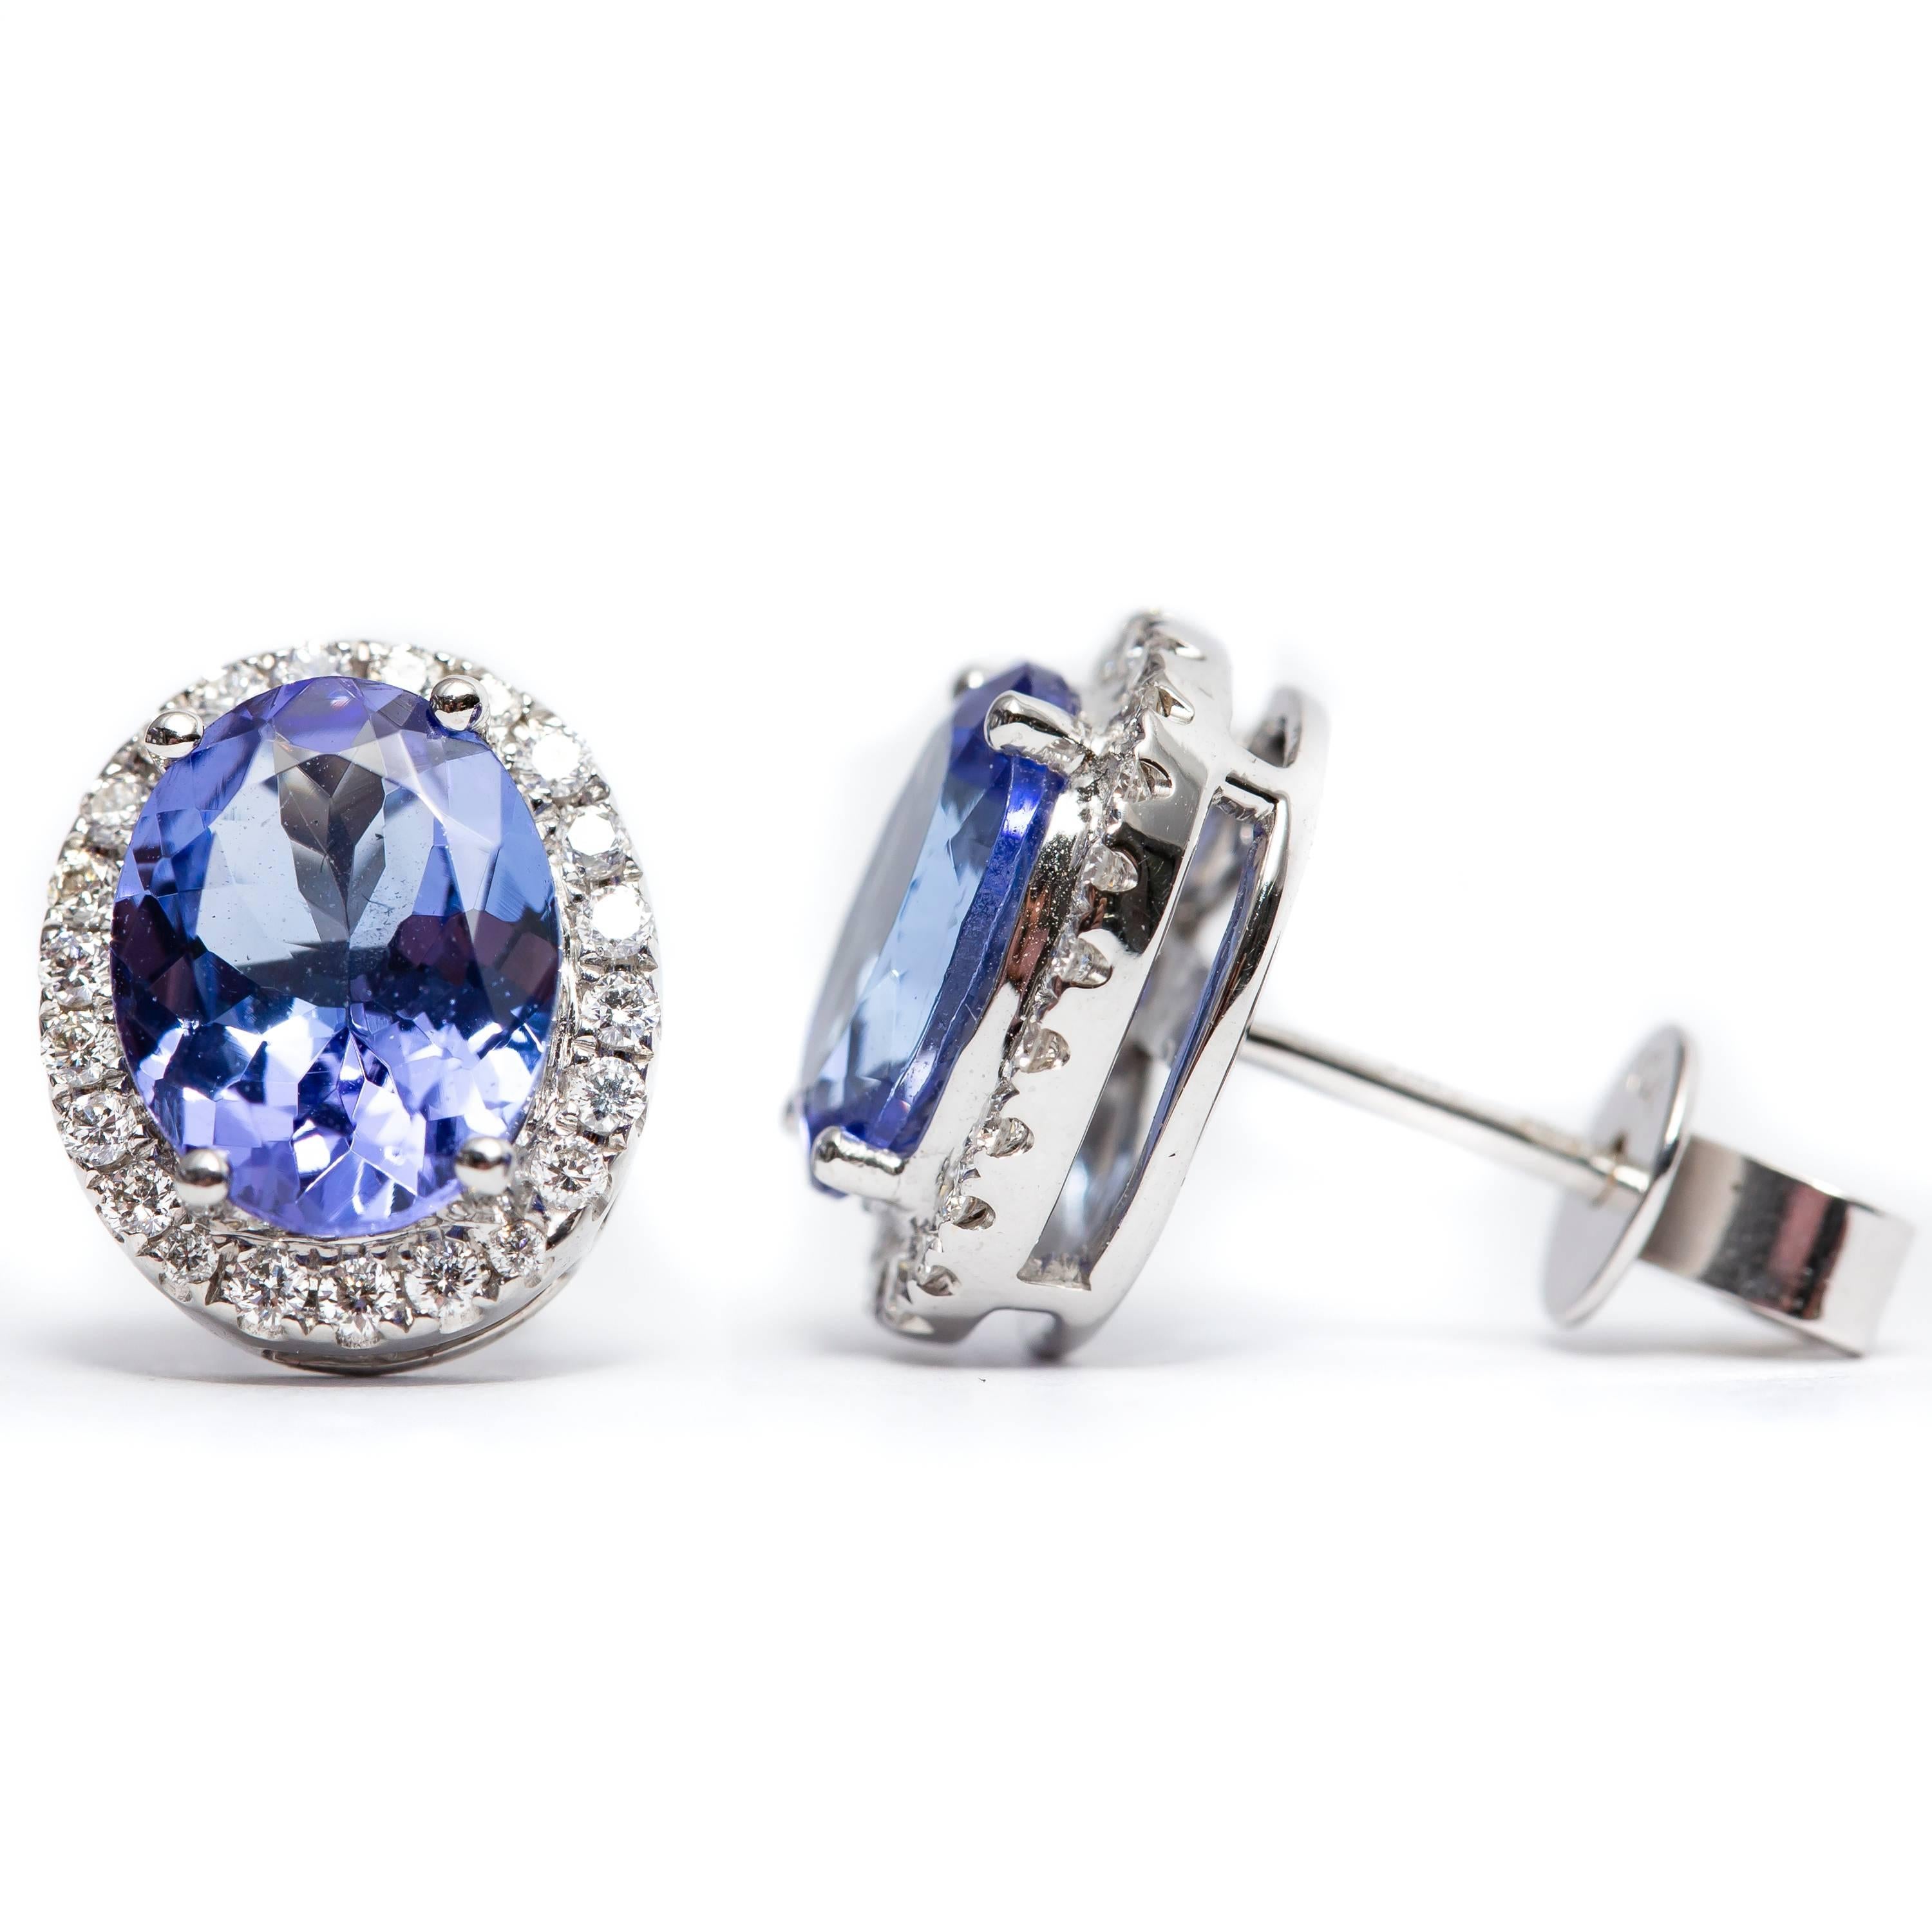 A beautiful pair of 3.61 Carat pear shaped tanzanite earrings featuring 0.35 Carats of Color G Clarity VS1 Round White Brilliant Diamonds. Set in 18 Karat White Gold. These earrings are available in other carat sizes. As well as 18 Karat Yellow and